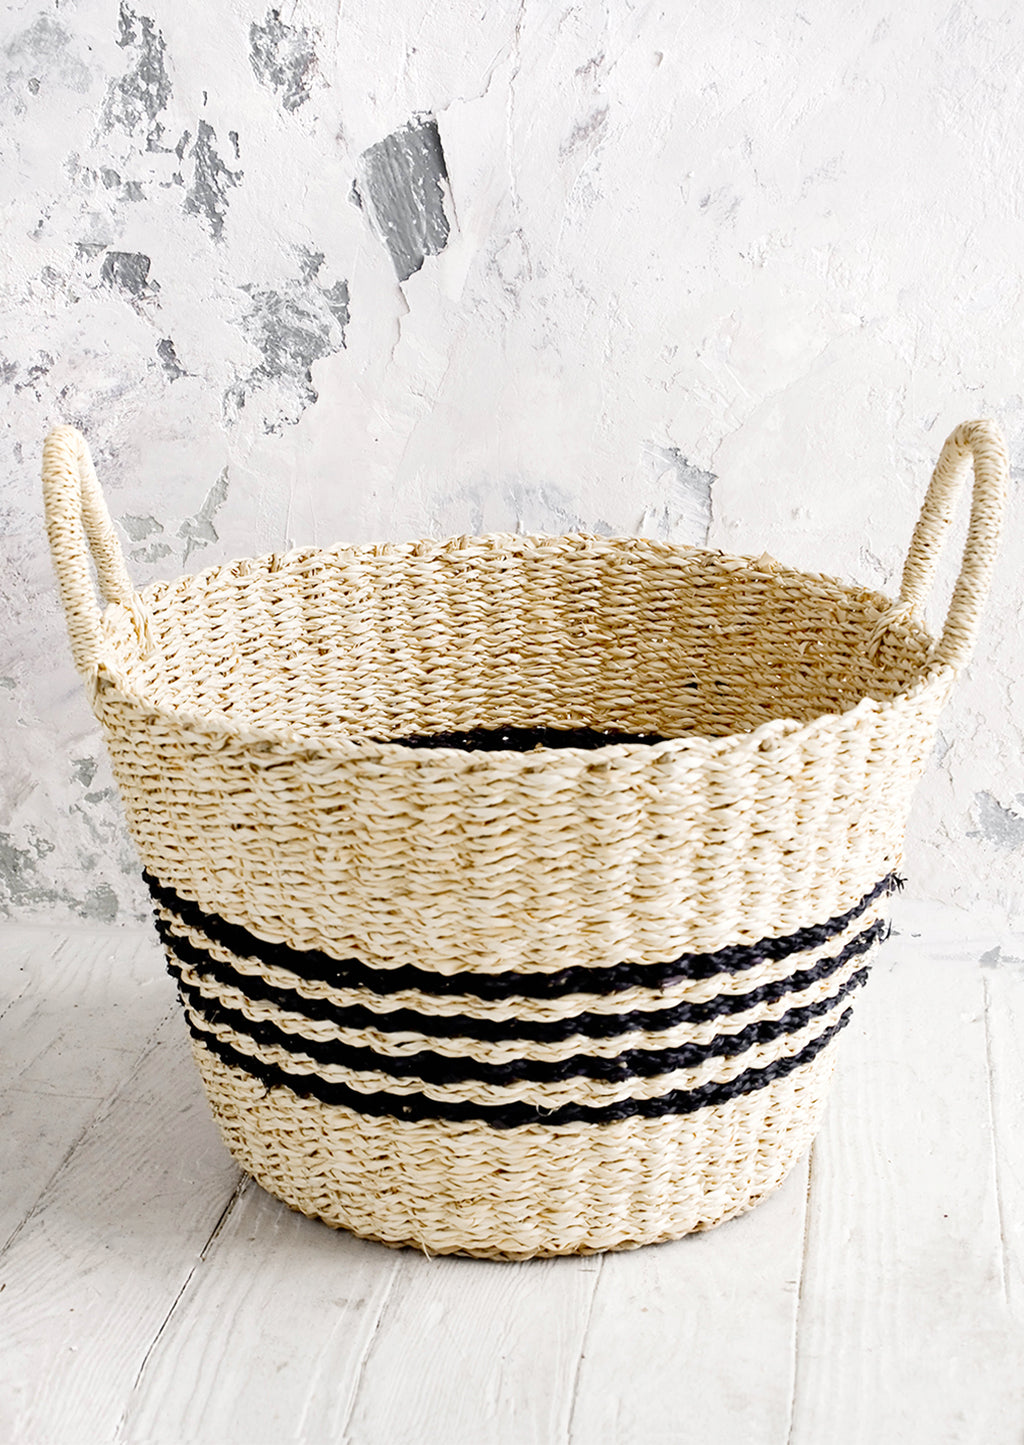 1: Round woven storage basket with thin black stripes, tapered bottom and two handles.